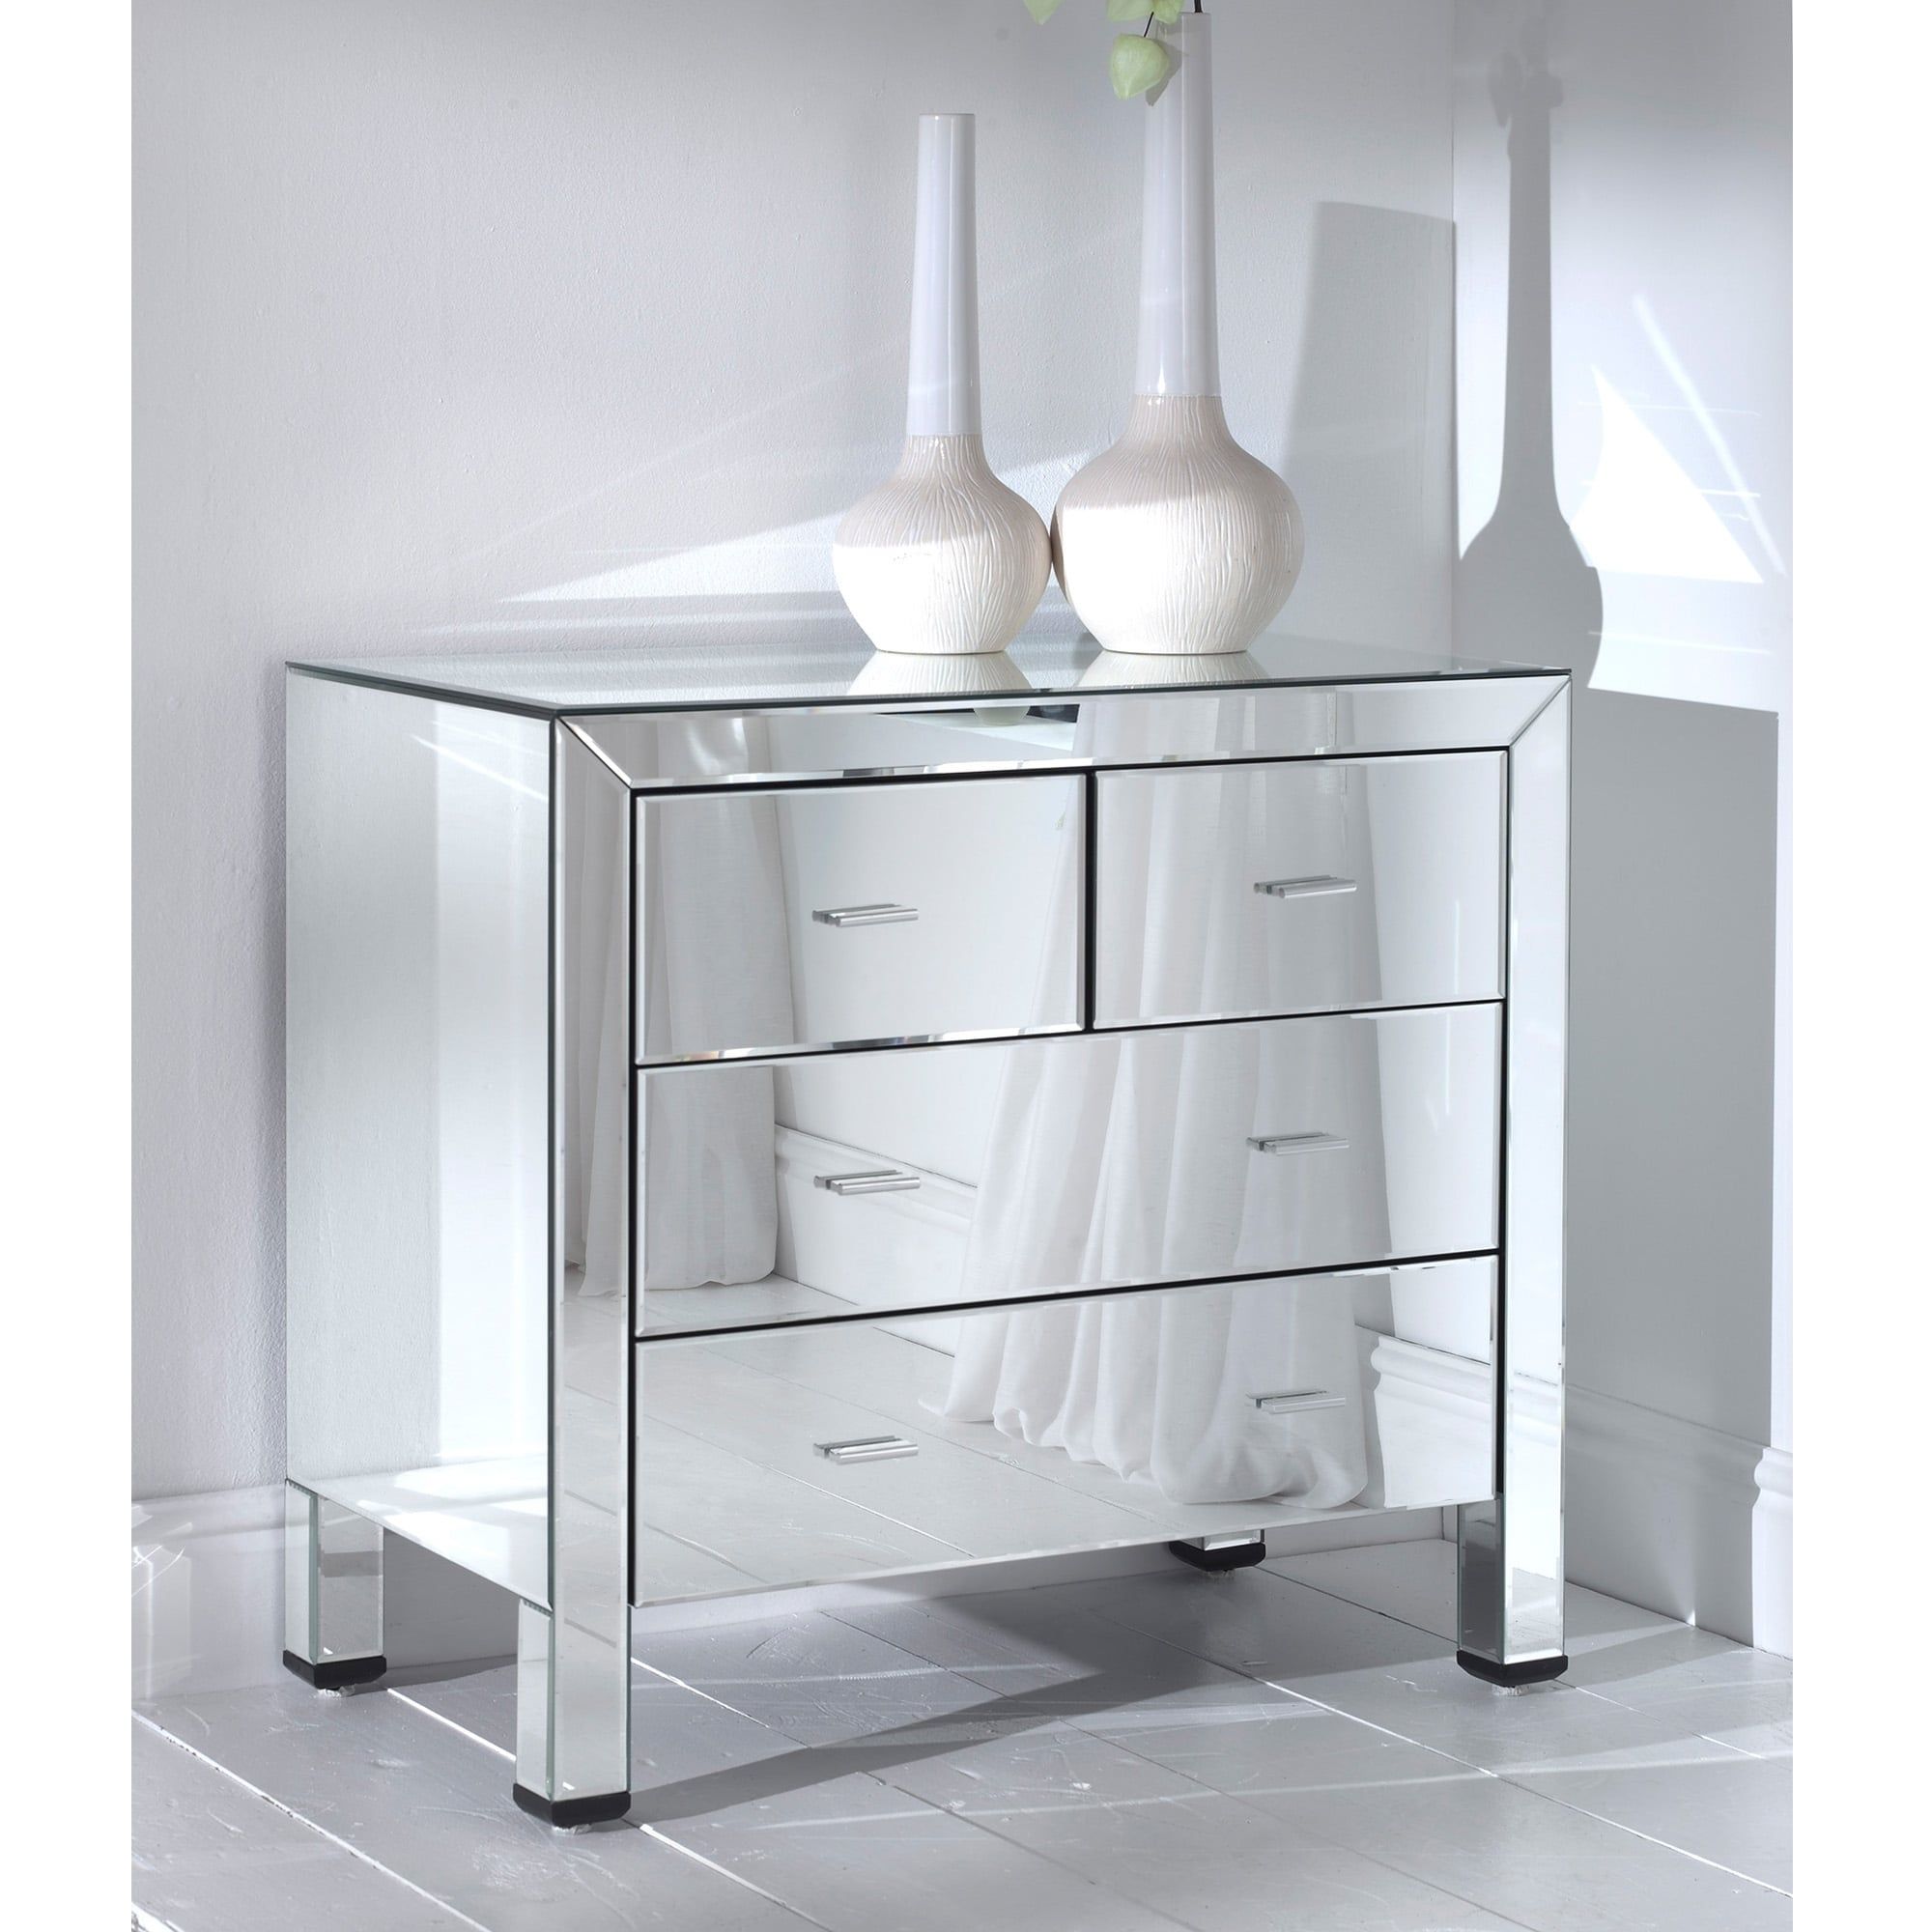 Romano Mirrored Chest 4 Drawer | Bedroom Chest Of Drawers | Mirrored | Throughout Romano Mirrored Wardrobes (View 8 of 15)